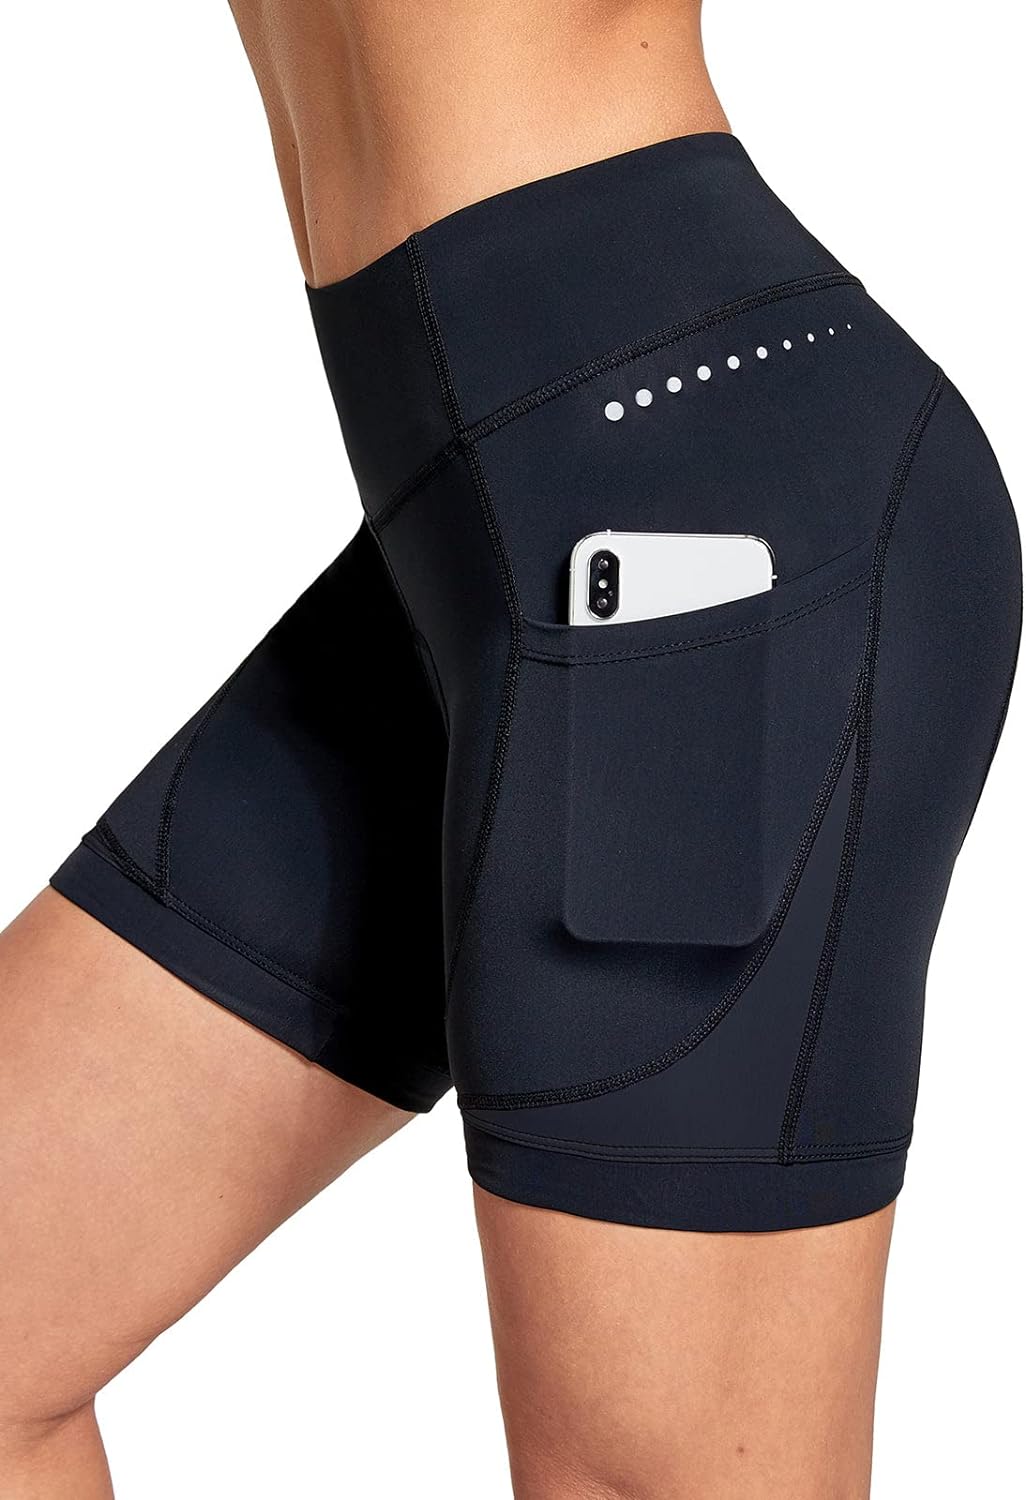 Women's 5D Padded Bike Shorts Cycling Underwear with Pockets UPF50+